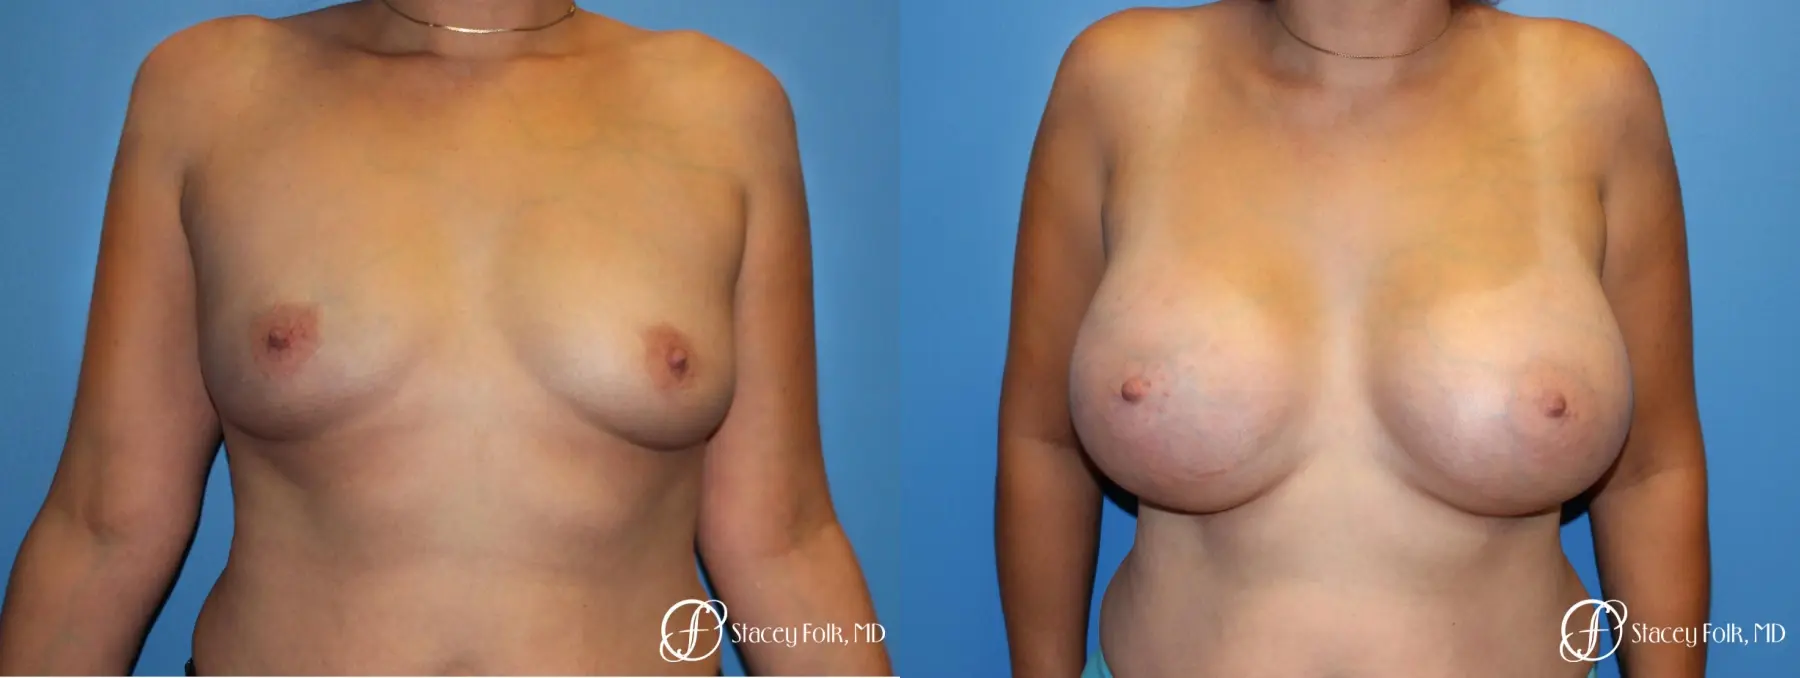 Denver Breast augmentation using textured implants 8271 - Before and After